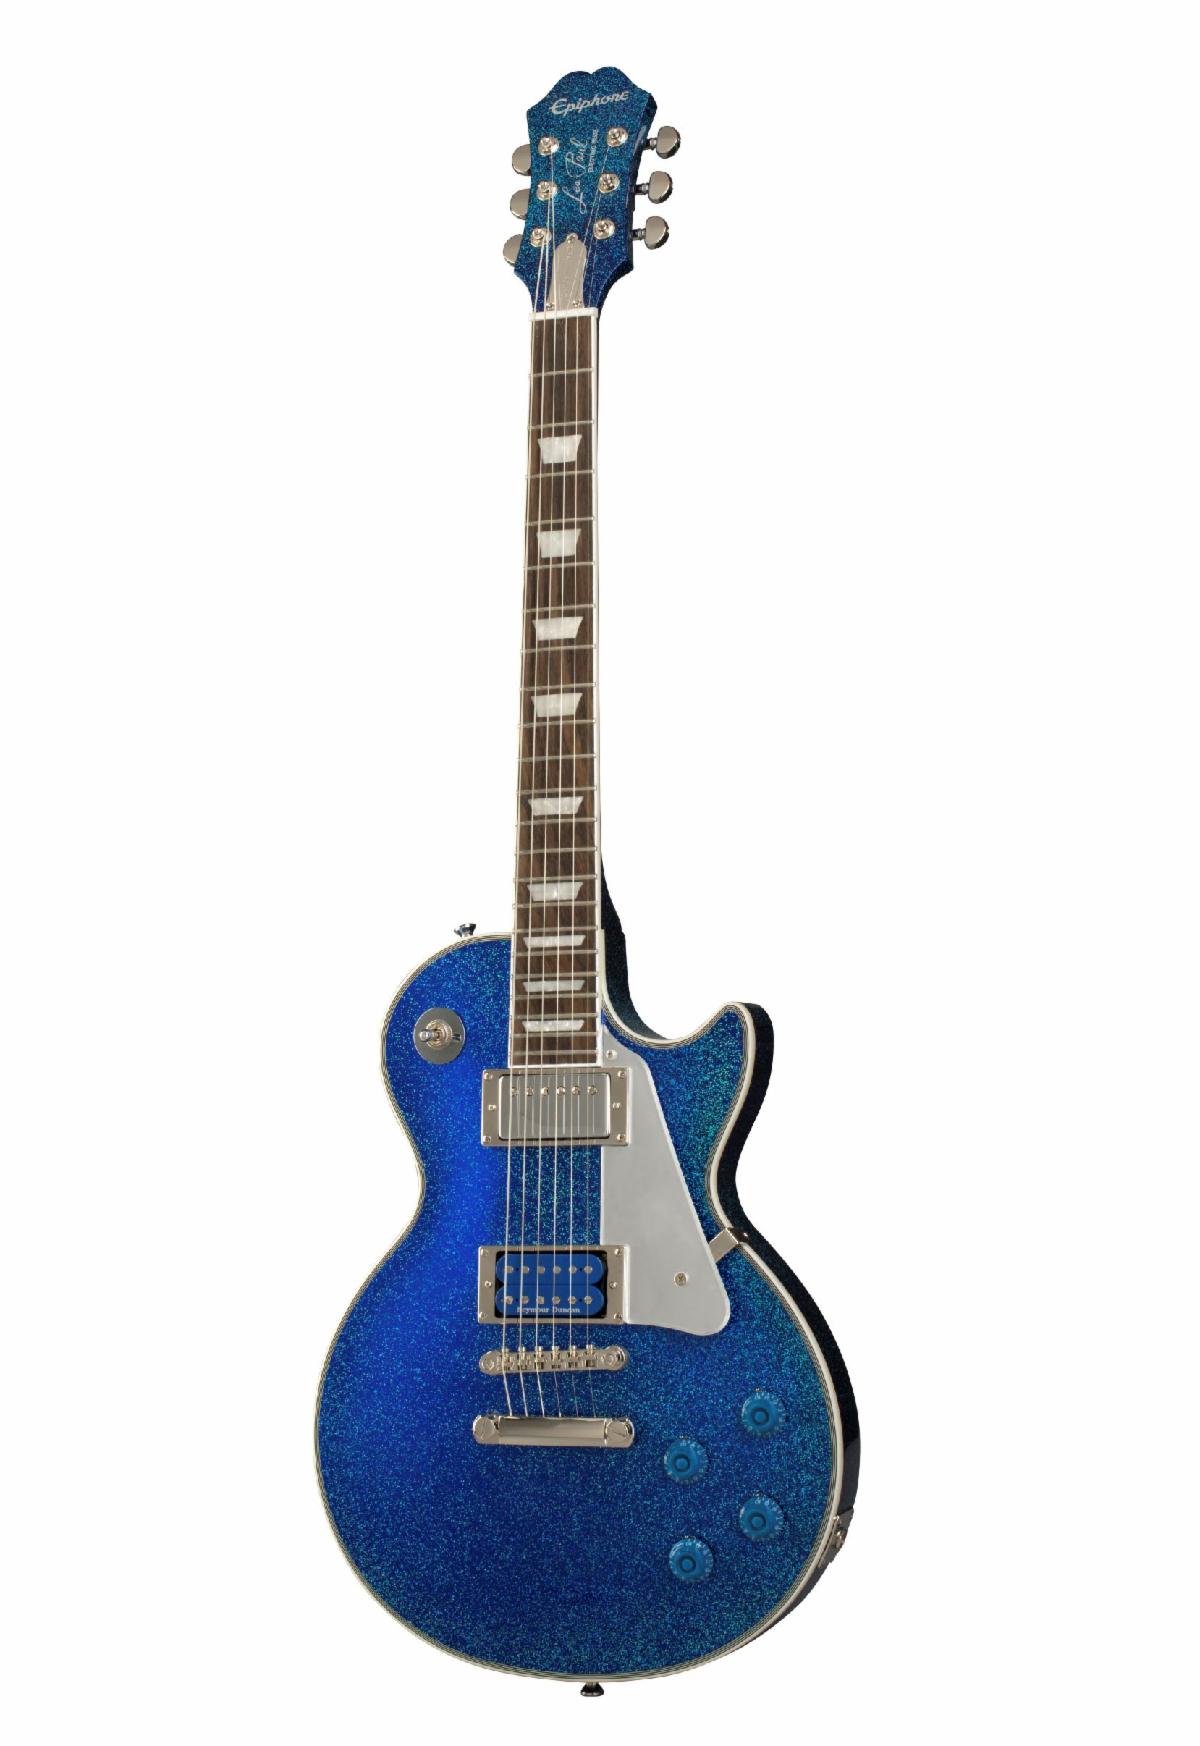 KISS Legend Tommy Thayer Limited-Edition 'Epiphone Electric Blue Les Paul Outfit' Available Worldwide Now